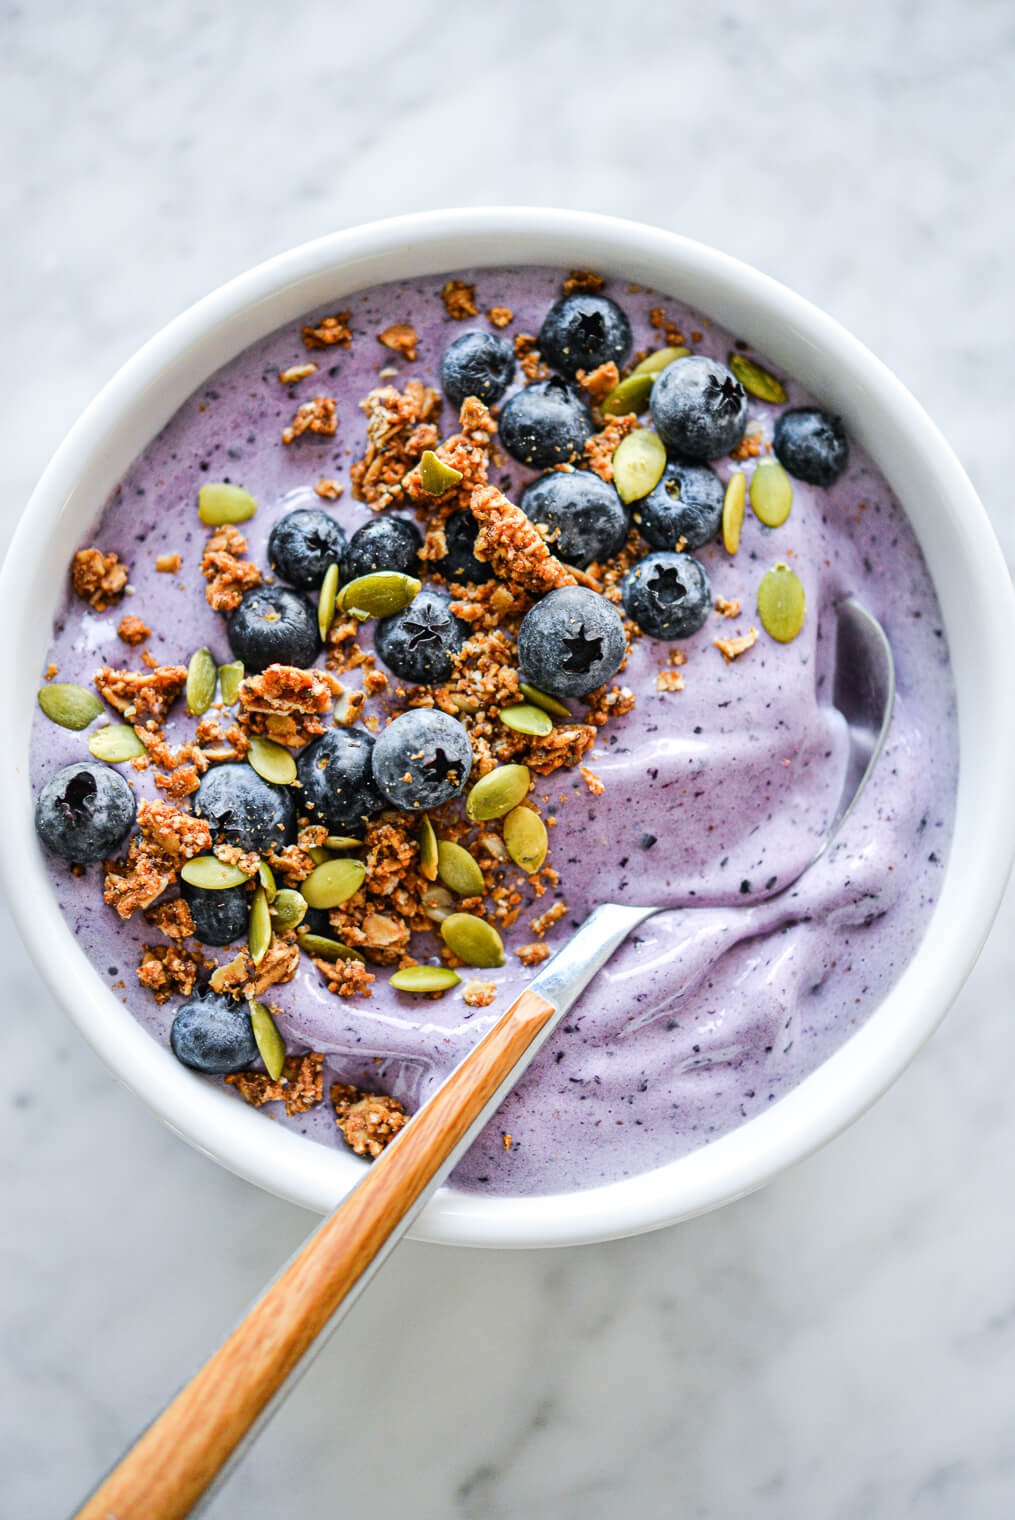 Blueberry smoothie with wooden and silver spoon in bowl topped with blueberries, pumpkin seeds, and granola